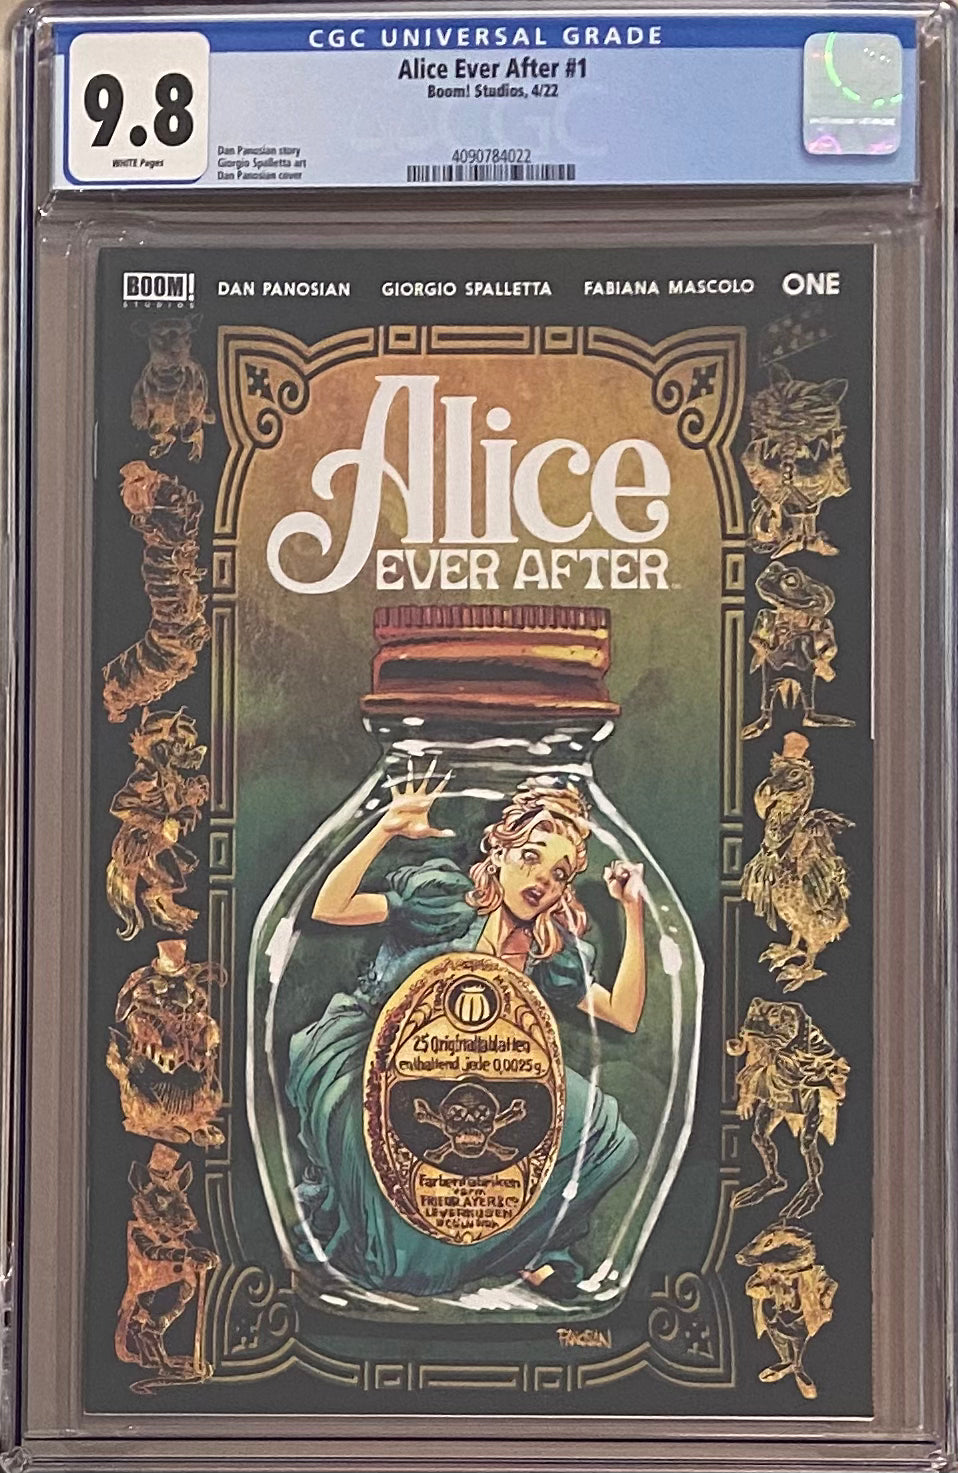 Alice Ever After #1 CGC 9.8